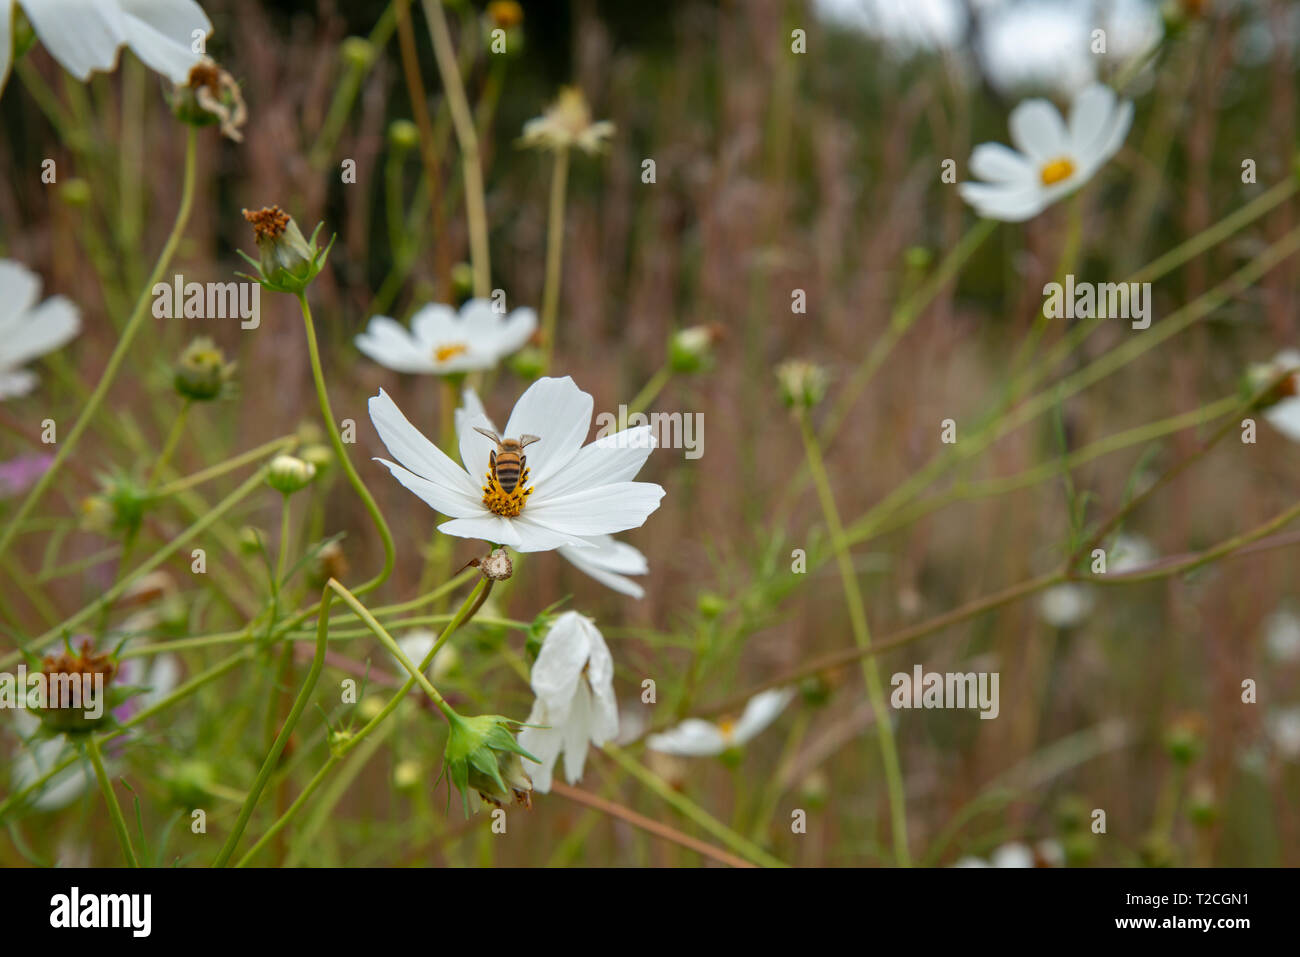 Johannesburg, South Africa, 1st April, 2019. A bee feasts on a Cosmos flower as rain clouds roll in over a Cosmos field in Delta Park. Cosmos bloom here in March, as autumn starts, as well as in November. Credit: Eva-Lotta Jansson/Alamy News Stock Photo